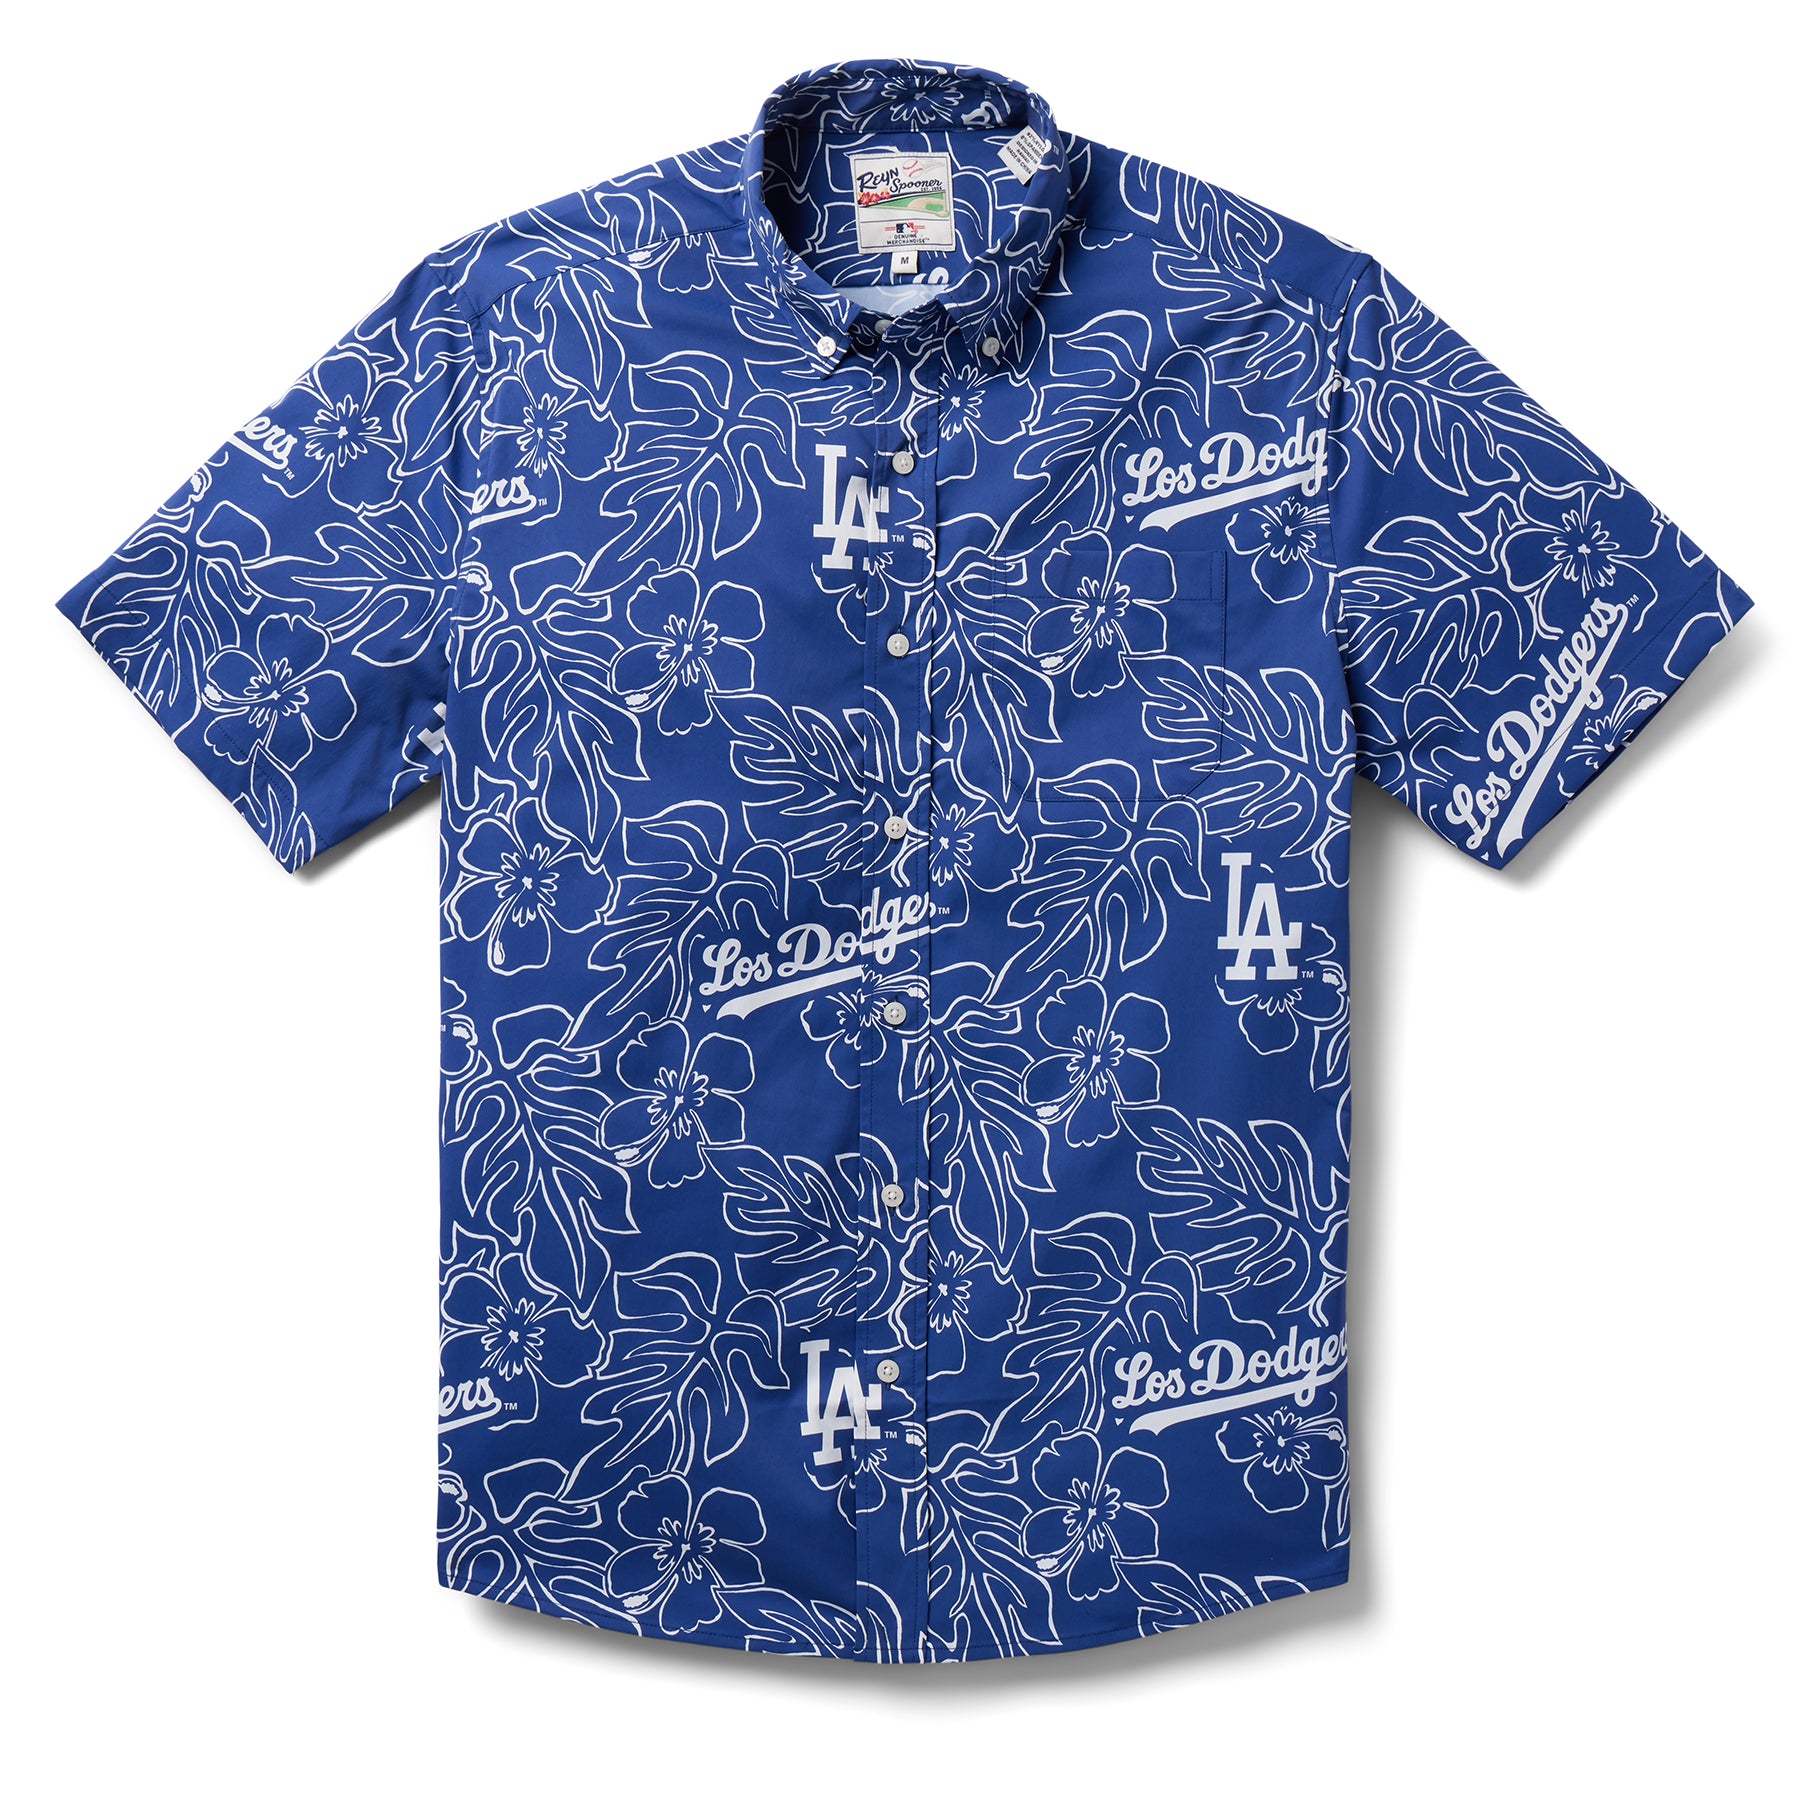 Los Angeles Dodgers City Connect Performance Button Front / Performance Fabric Blue / M by Reyn Spooner